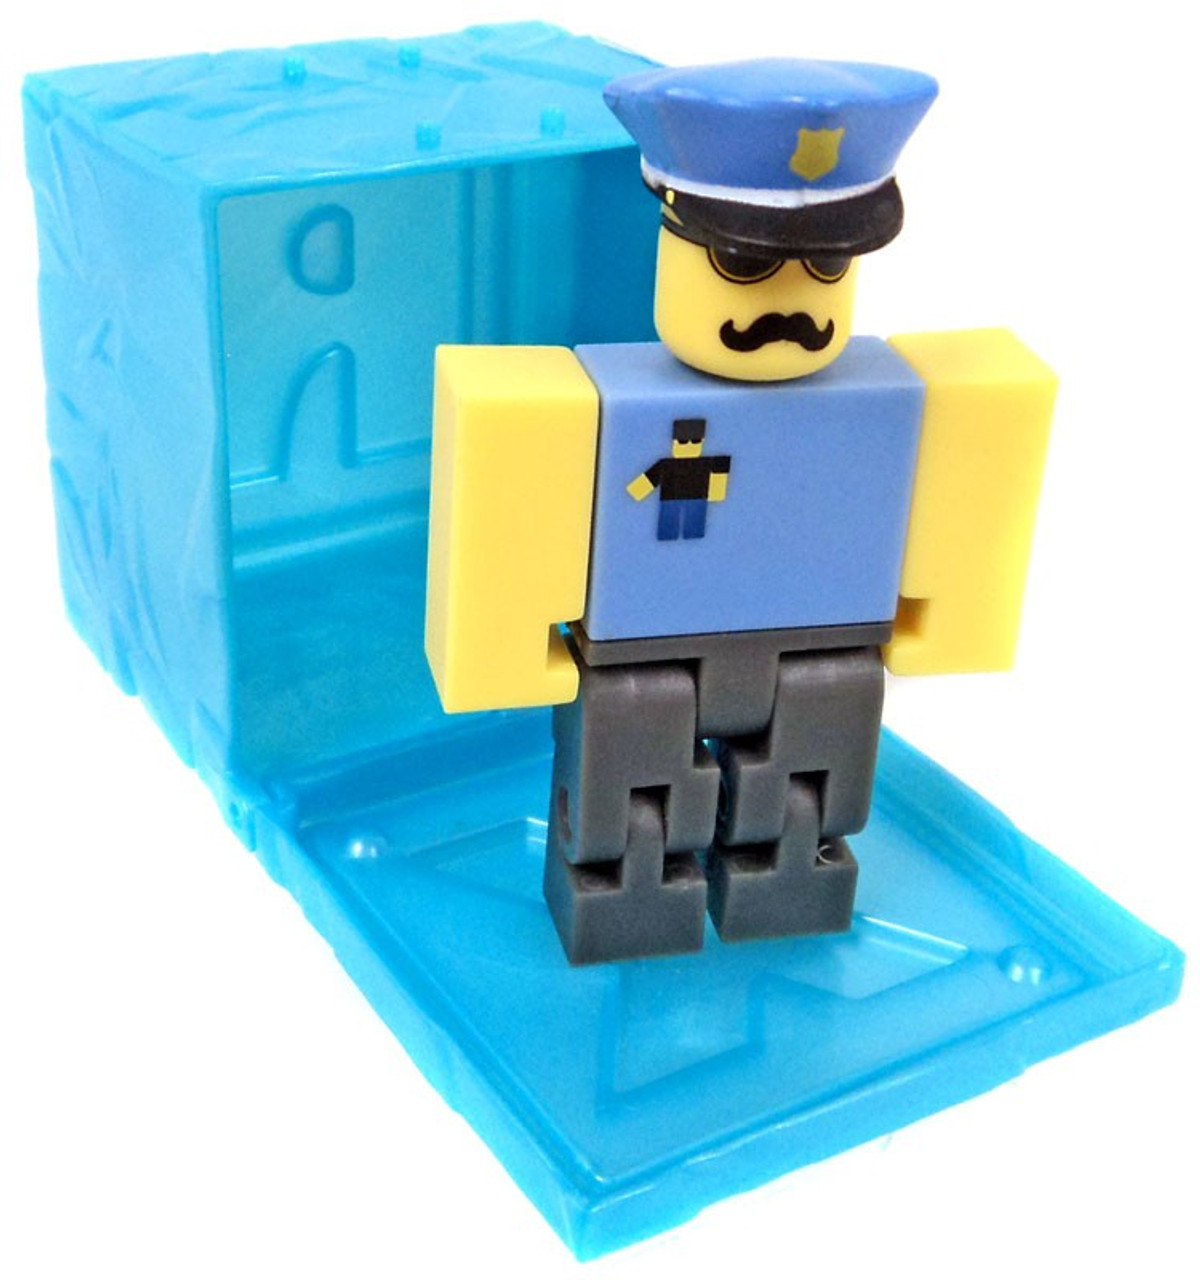 Roblox Red Series 3 Retail Tycoon Rent A Cop 3 Mini Figure Blue Cube With Online Code Loose Jazwares Toywiz - roblox five nights at freddys plushie tycoon